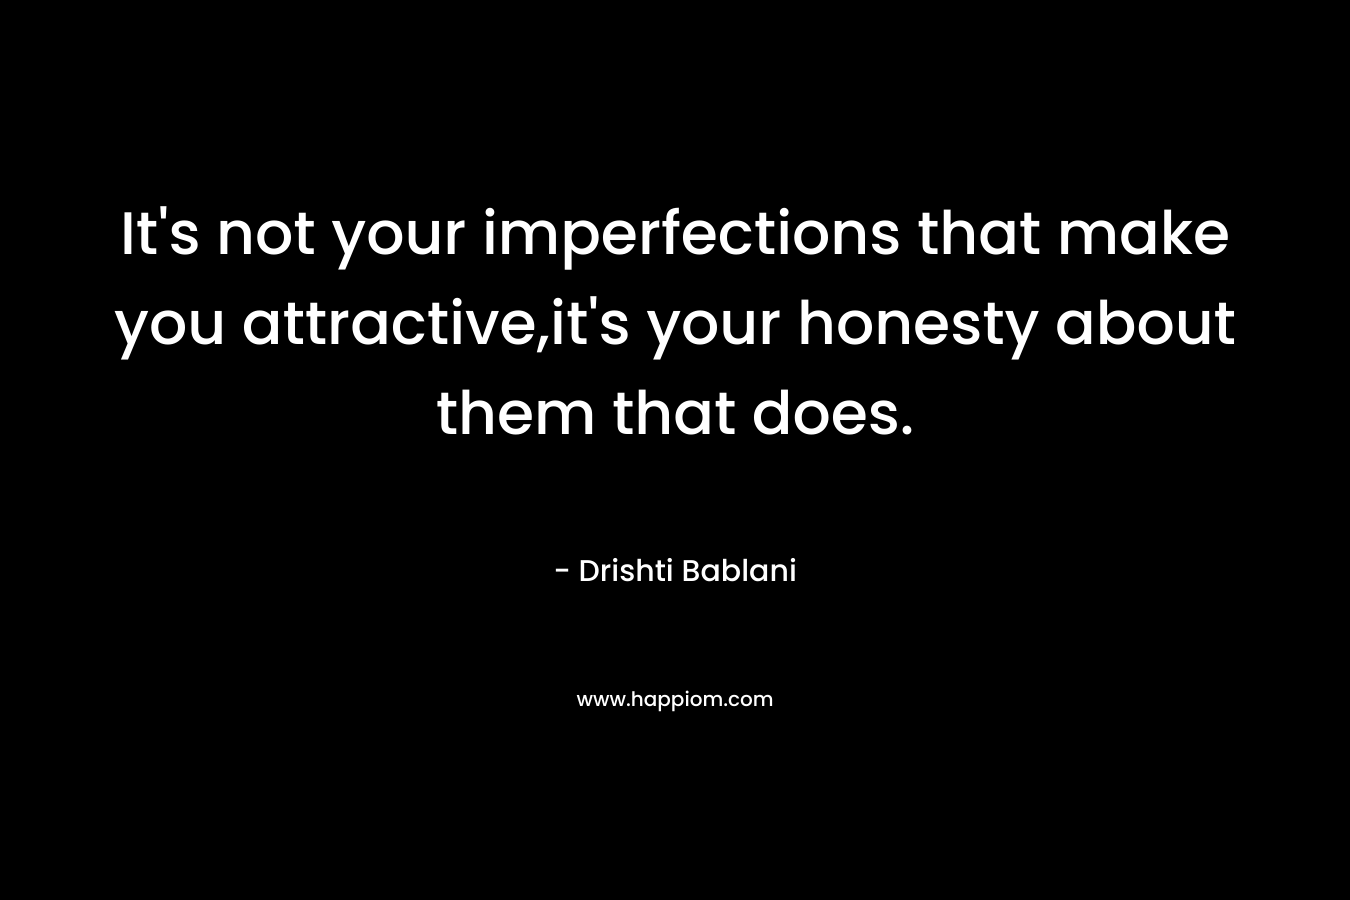 It's not your imperfections that make you attractive,it's your honesty about them that does.